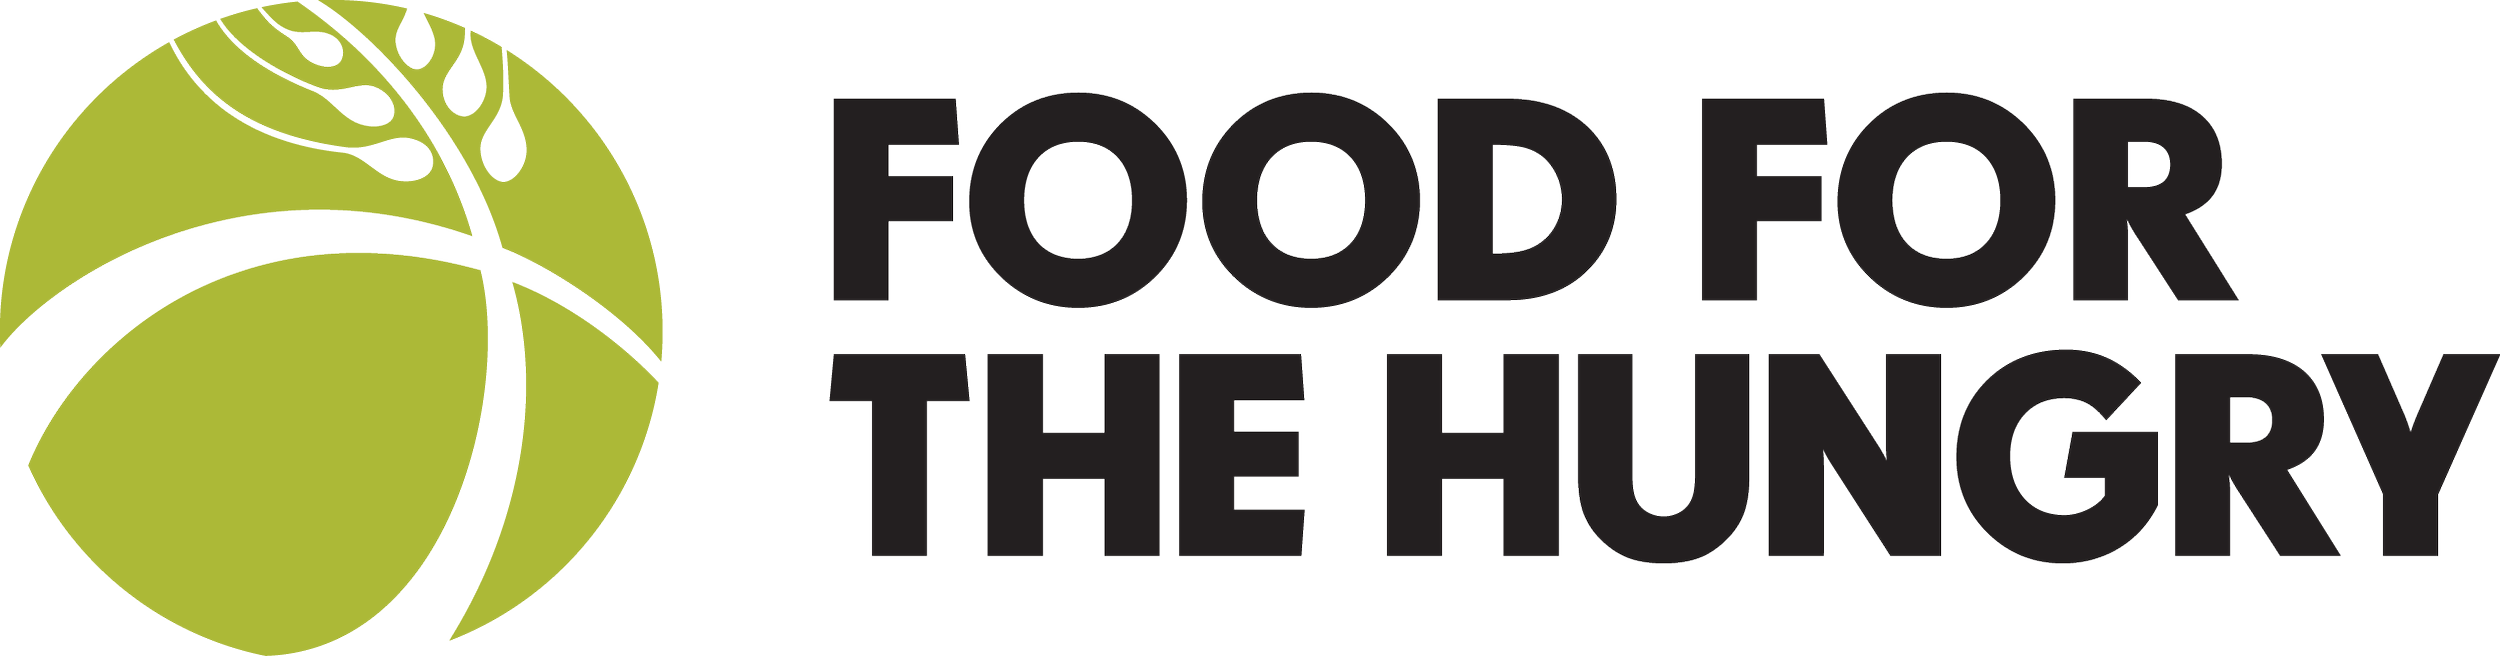 Copy of food-for-the-hungry.png